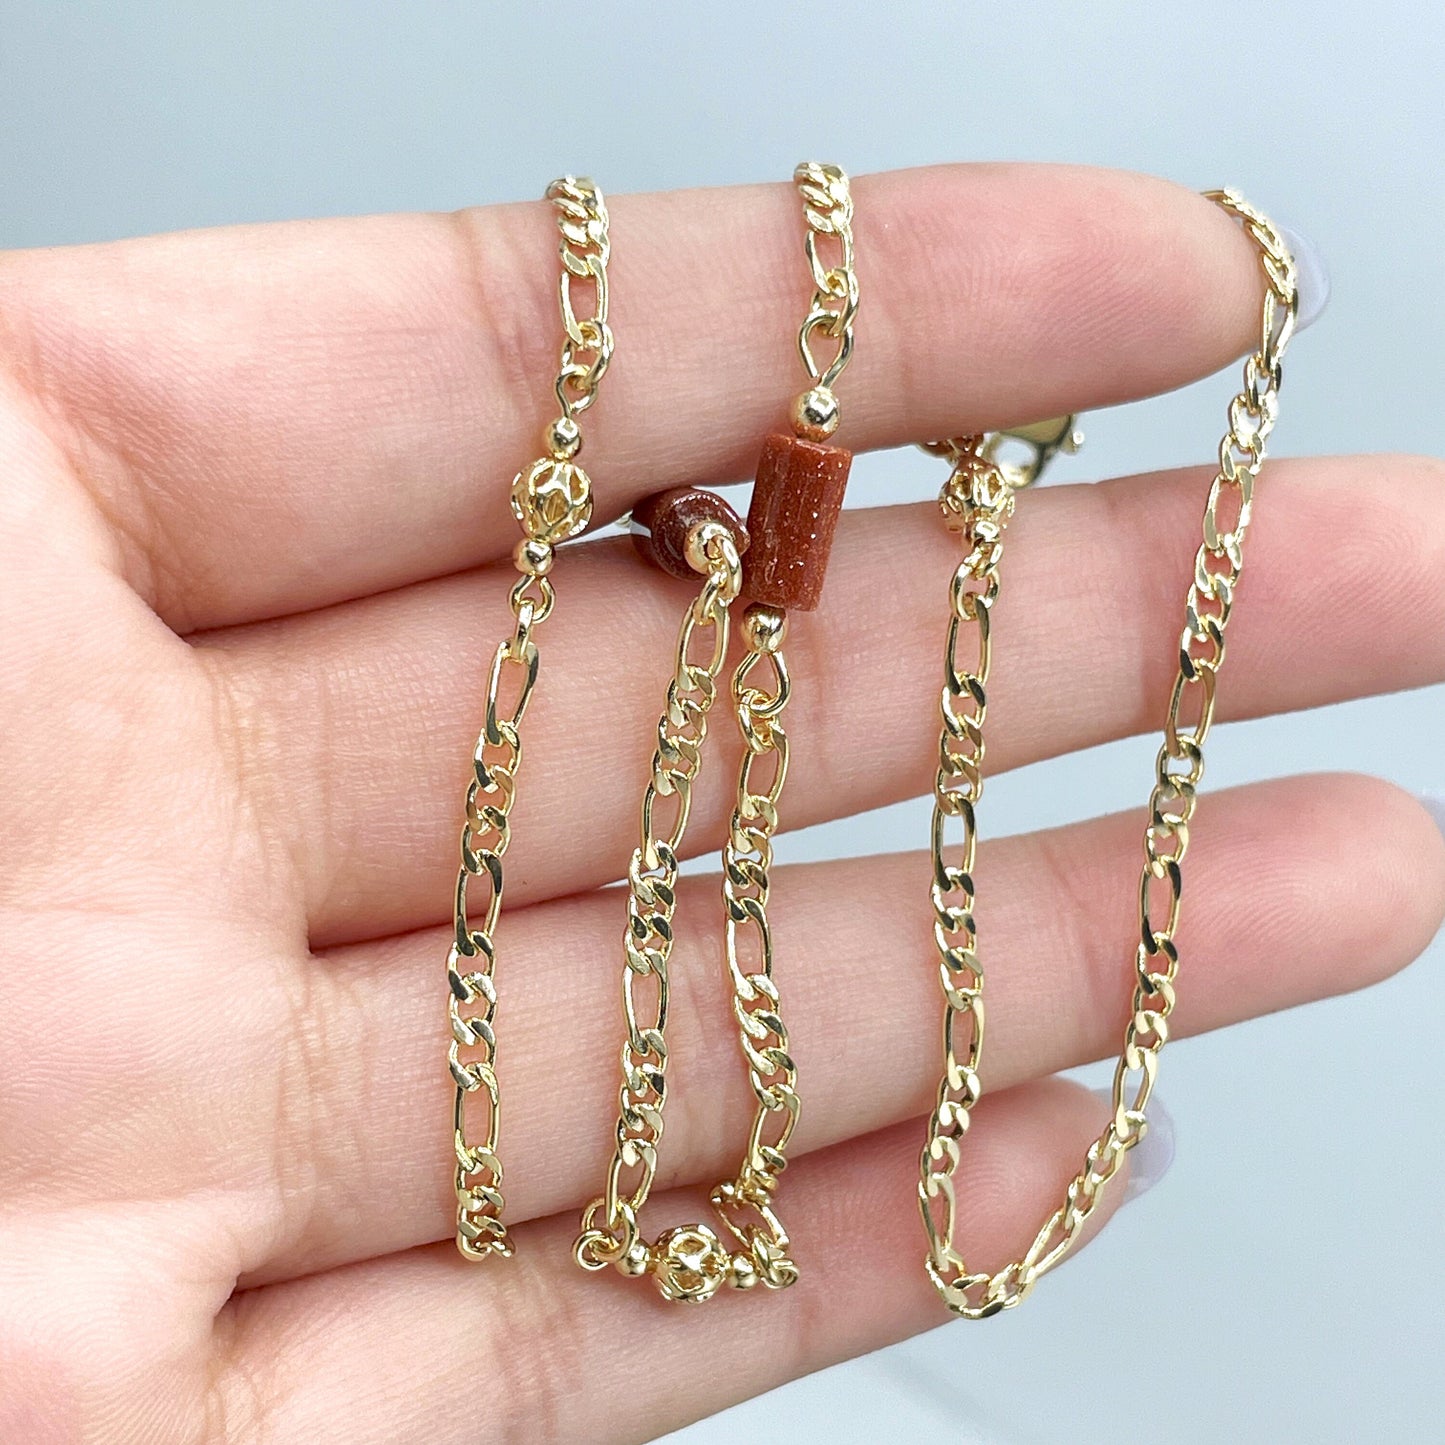 18k Gold Filled Brown Aventurine Tubular and Gold Beads 2.5mm Figaro Chain Bracelet Wholesale Jewelry Making Supplies